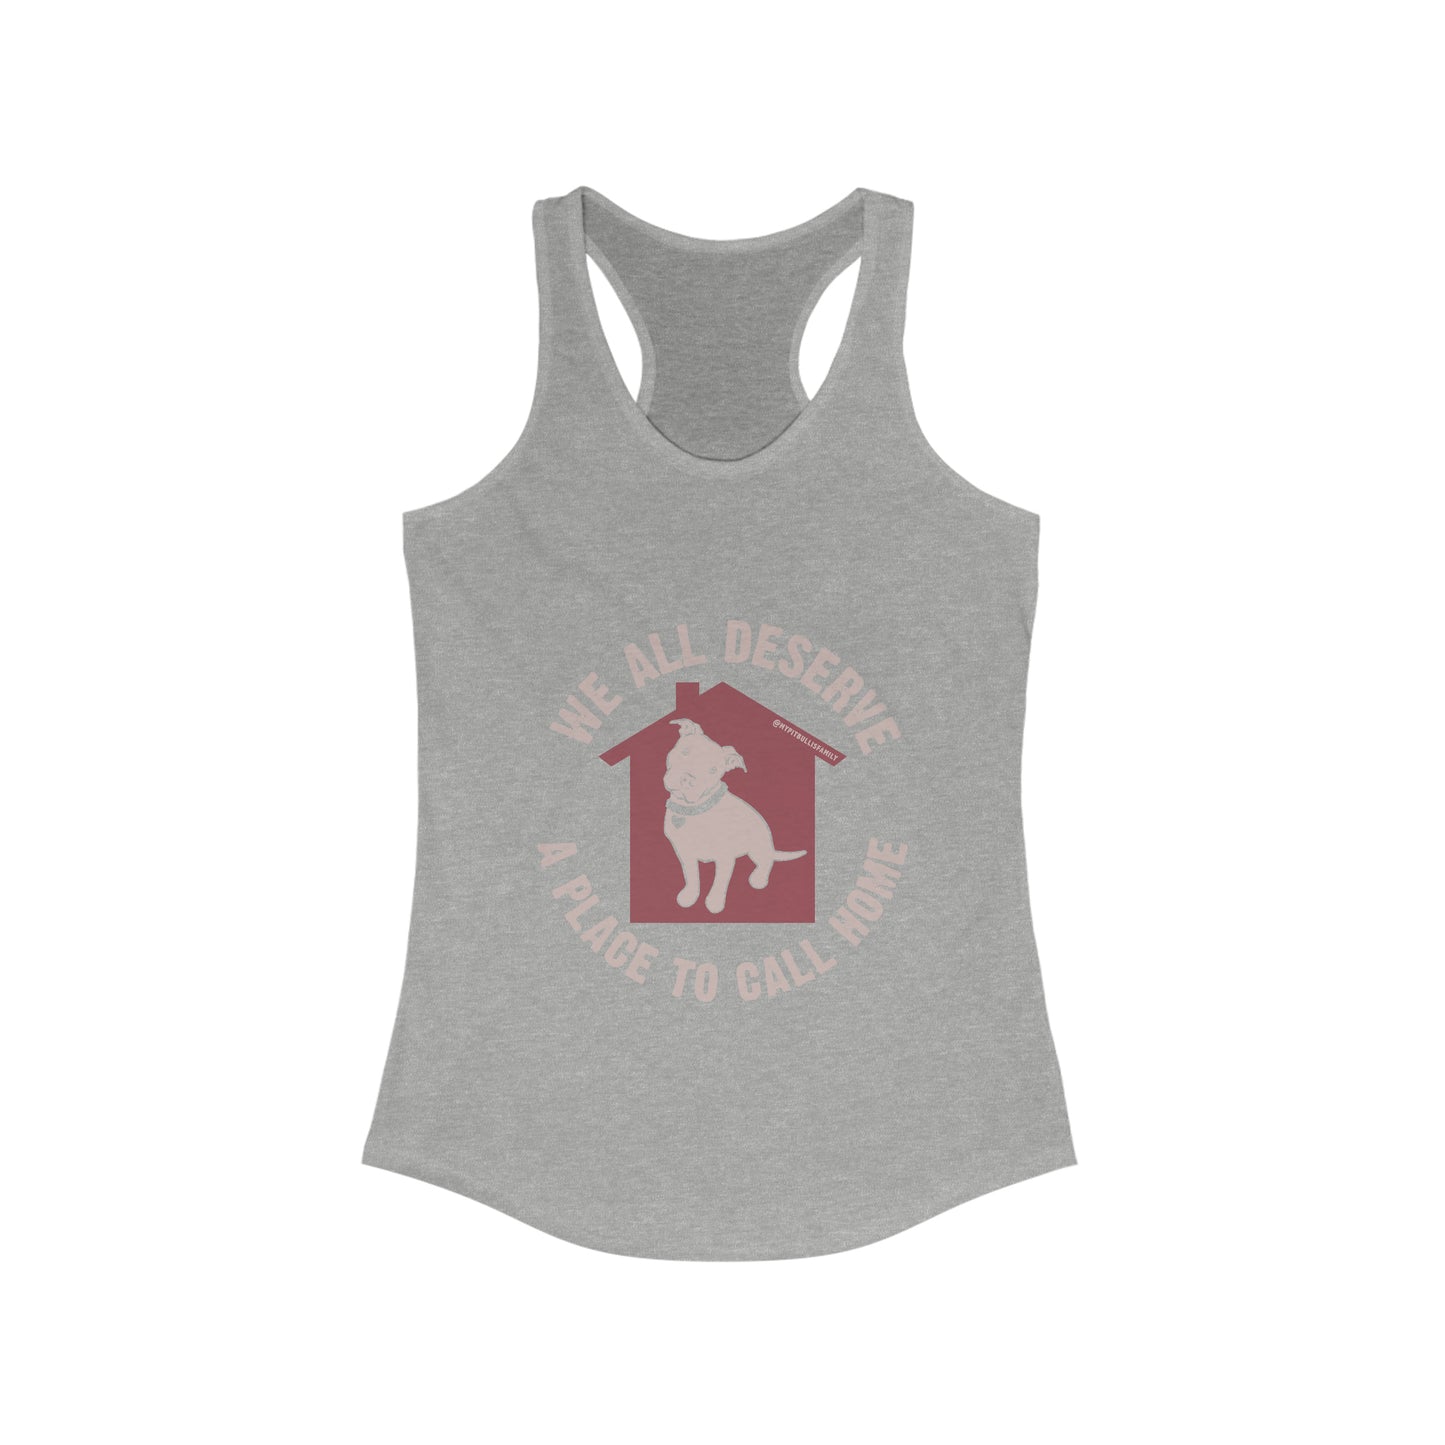 We All Deserve a Place to Call Home Women's Ideal Racerback Tank